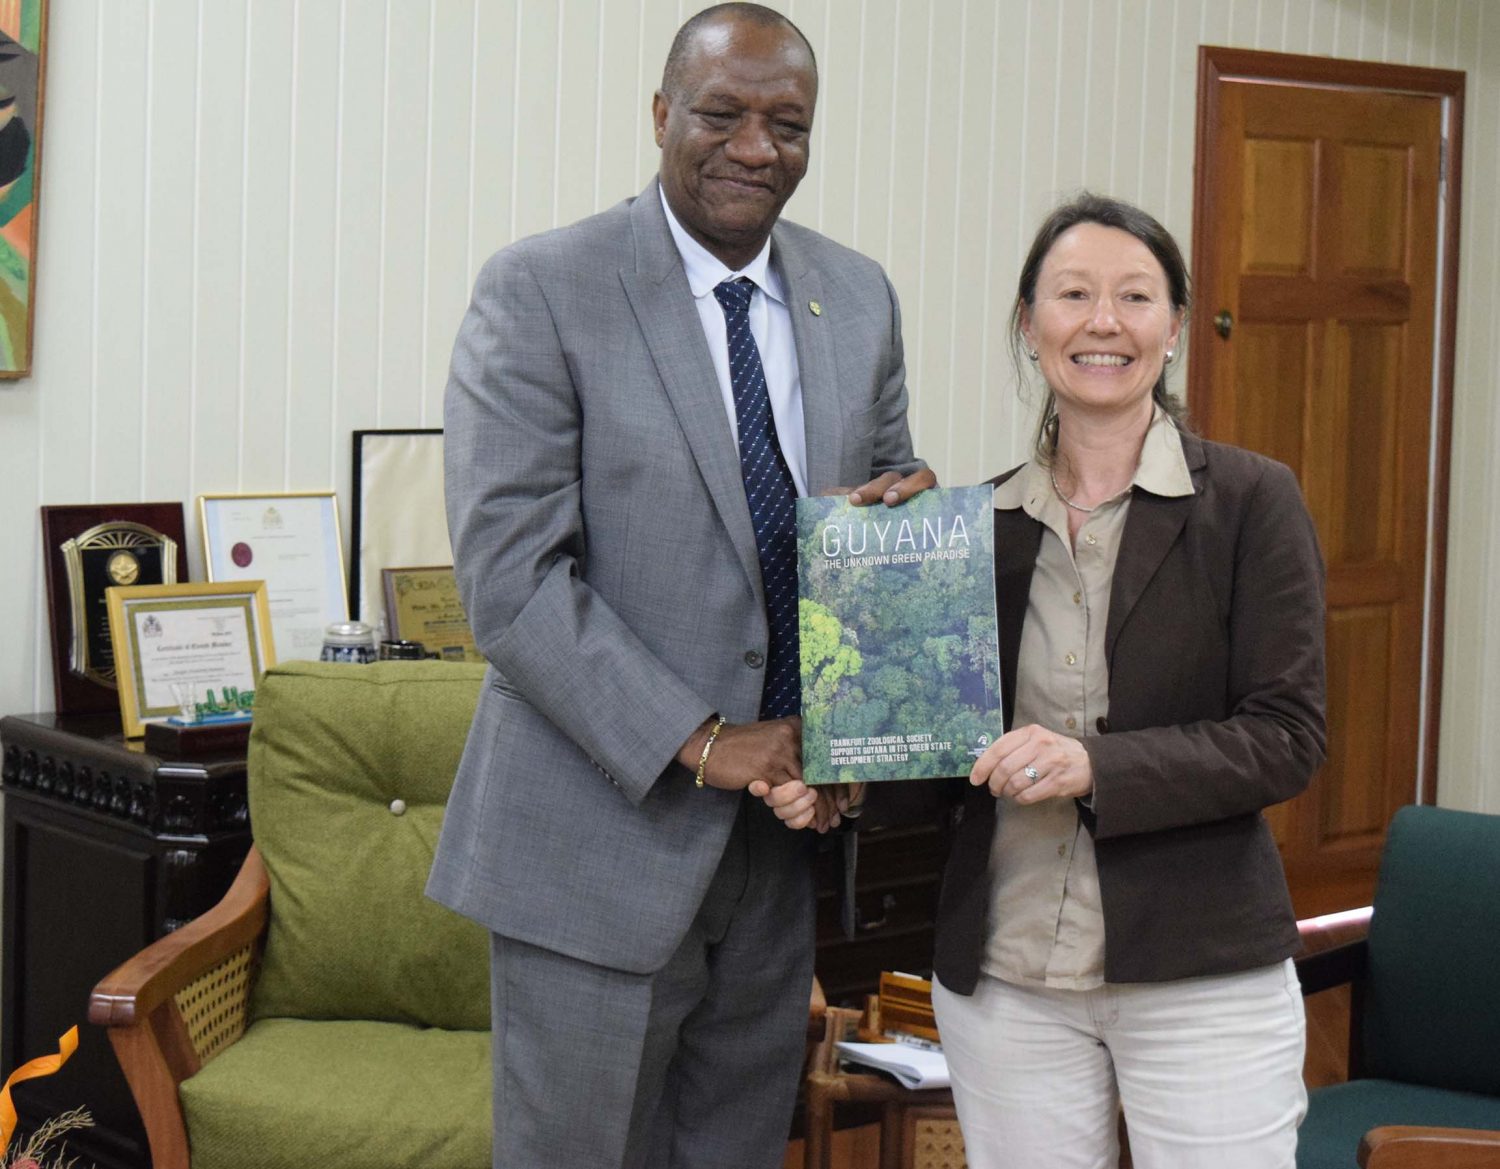 Minister of State, Joseph Harmon was presented with a book on the Frankfurt Zoological Society’s support for and work in Guyana.  (Ministry of the Presidency photo)

